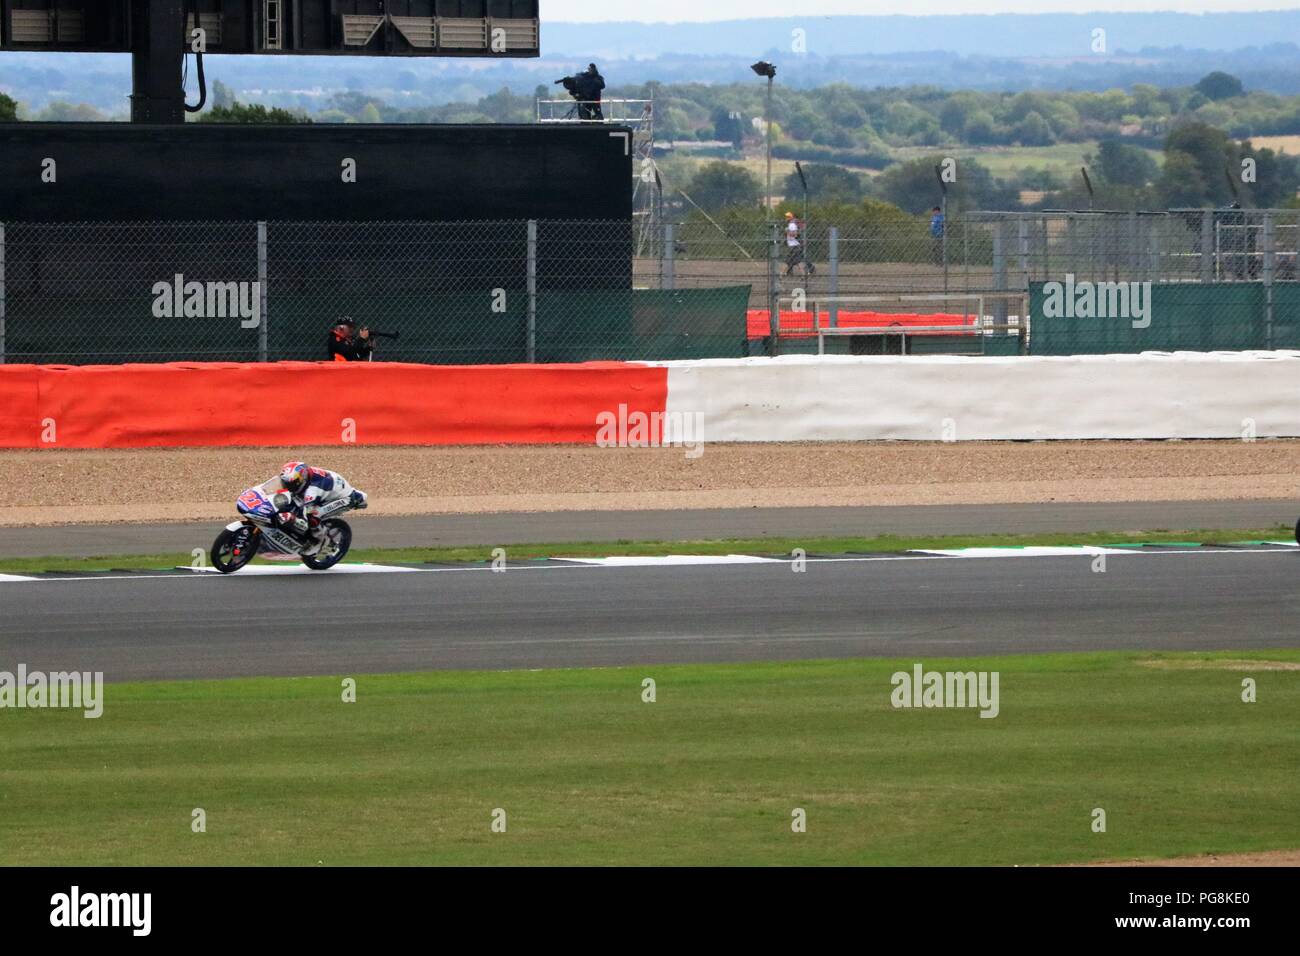 Silverstone, Northamptonshire, UK 24th August 2018 - 2018 GOPRO British Grand Prix MOTORGP Free Practise Day - Plenty of two wheel action on the track with fun for all the family with funfair, Army Displays and Motorcross action.  Credit:  Michelle Bridges / Alamy Live News Stock Photo